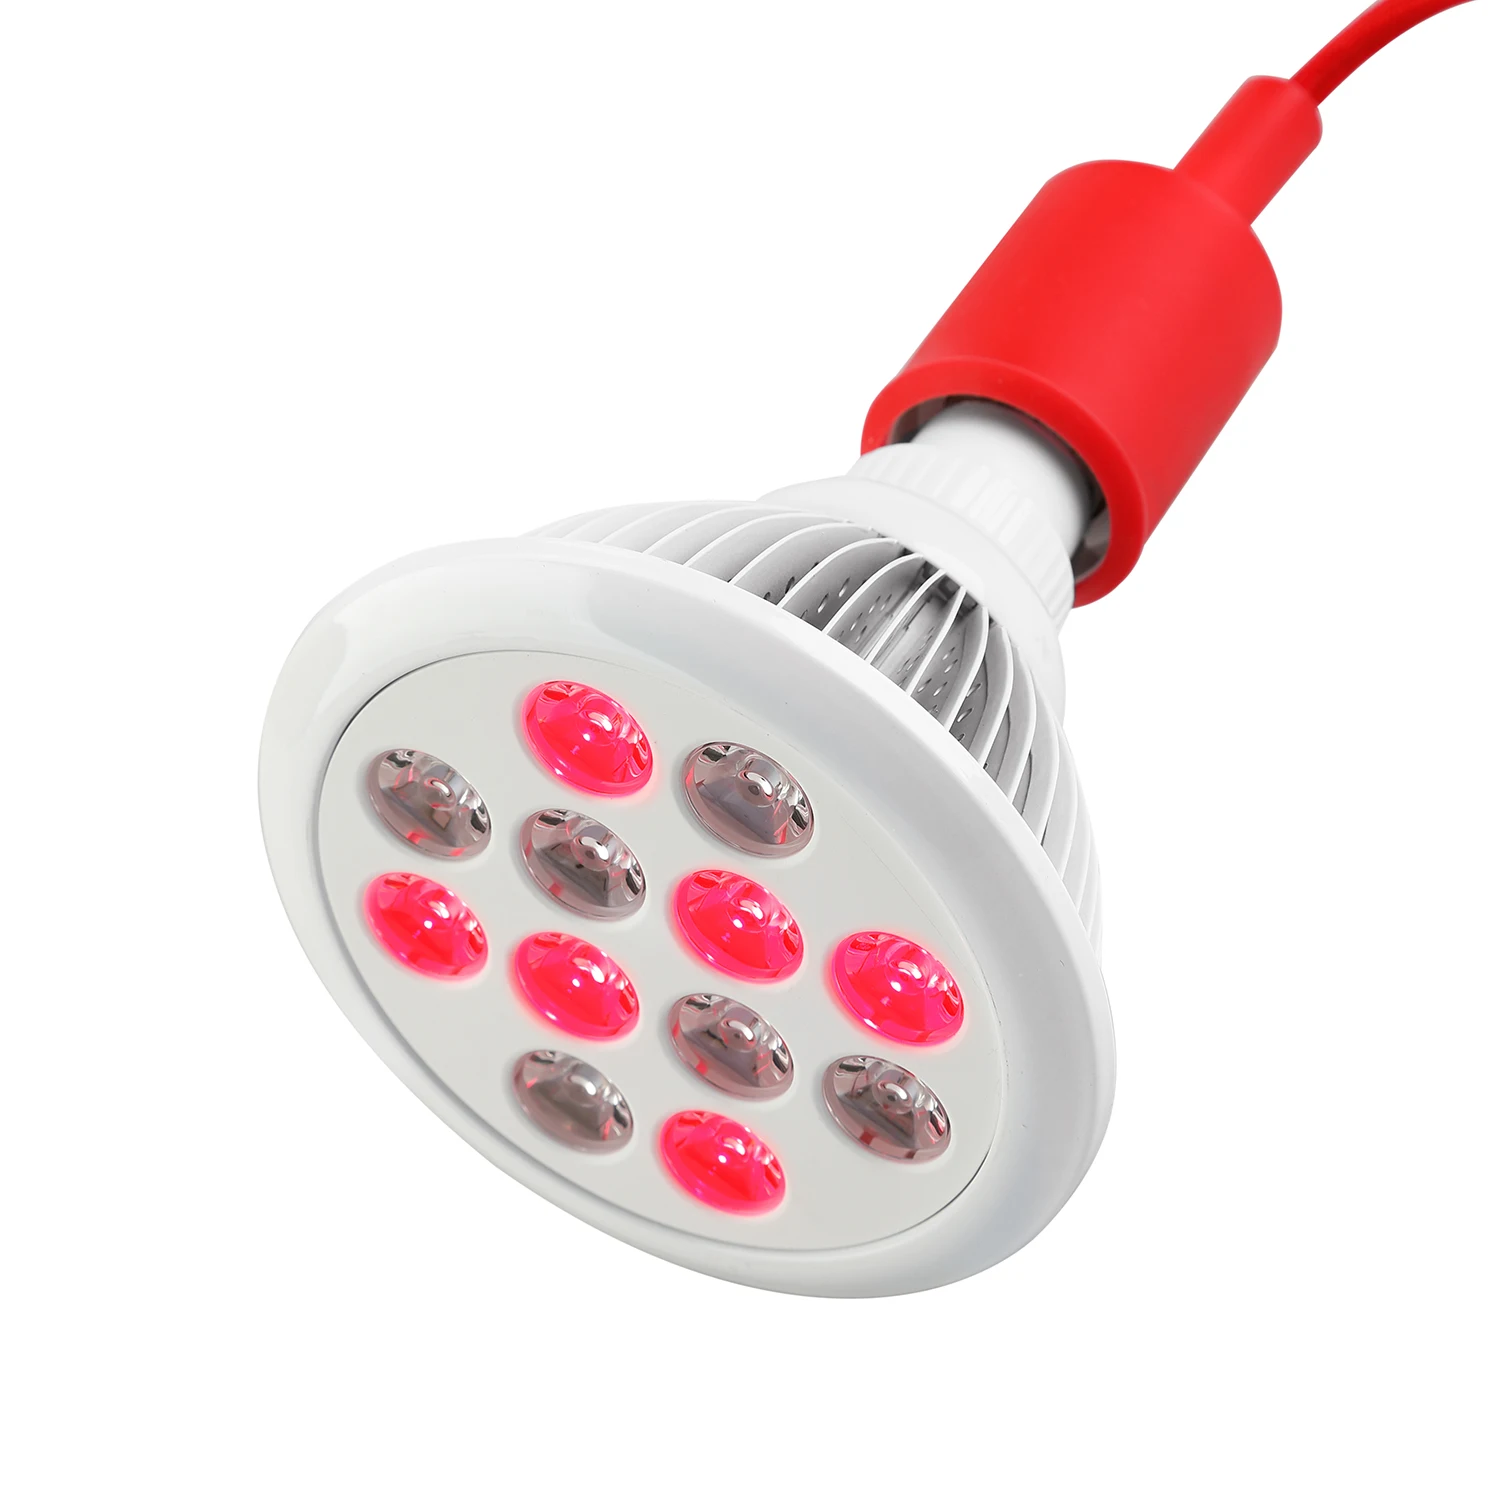 

24W collagen led red light therapy,anti aging,heal wound,reduce wrinkles, N/a